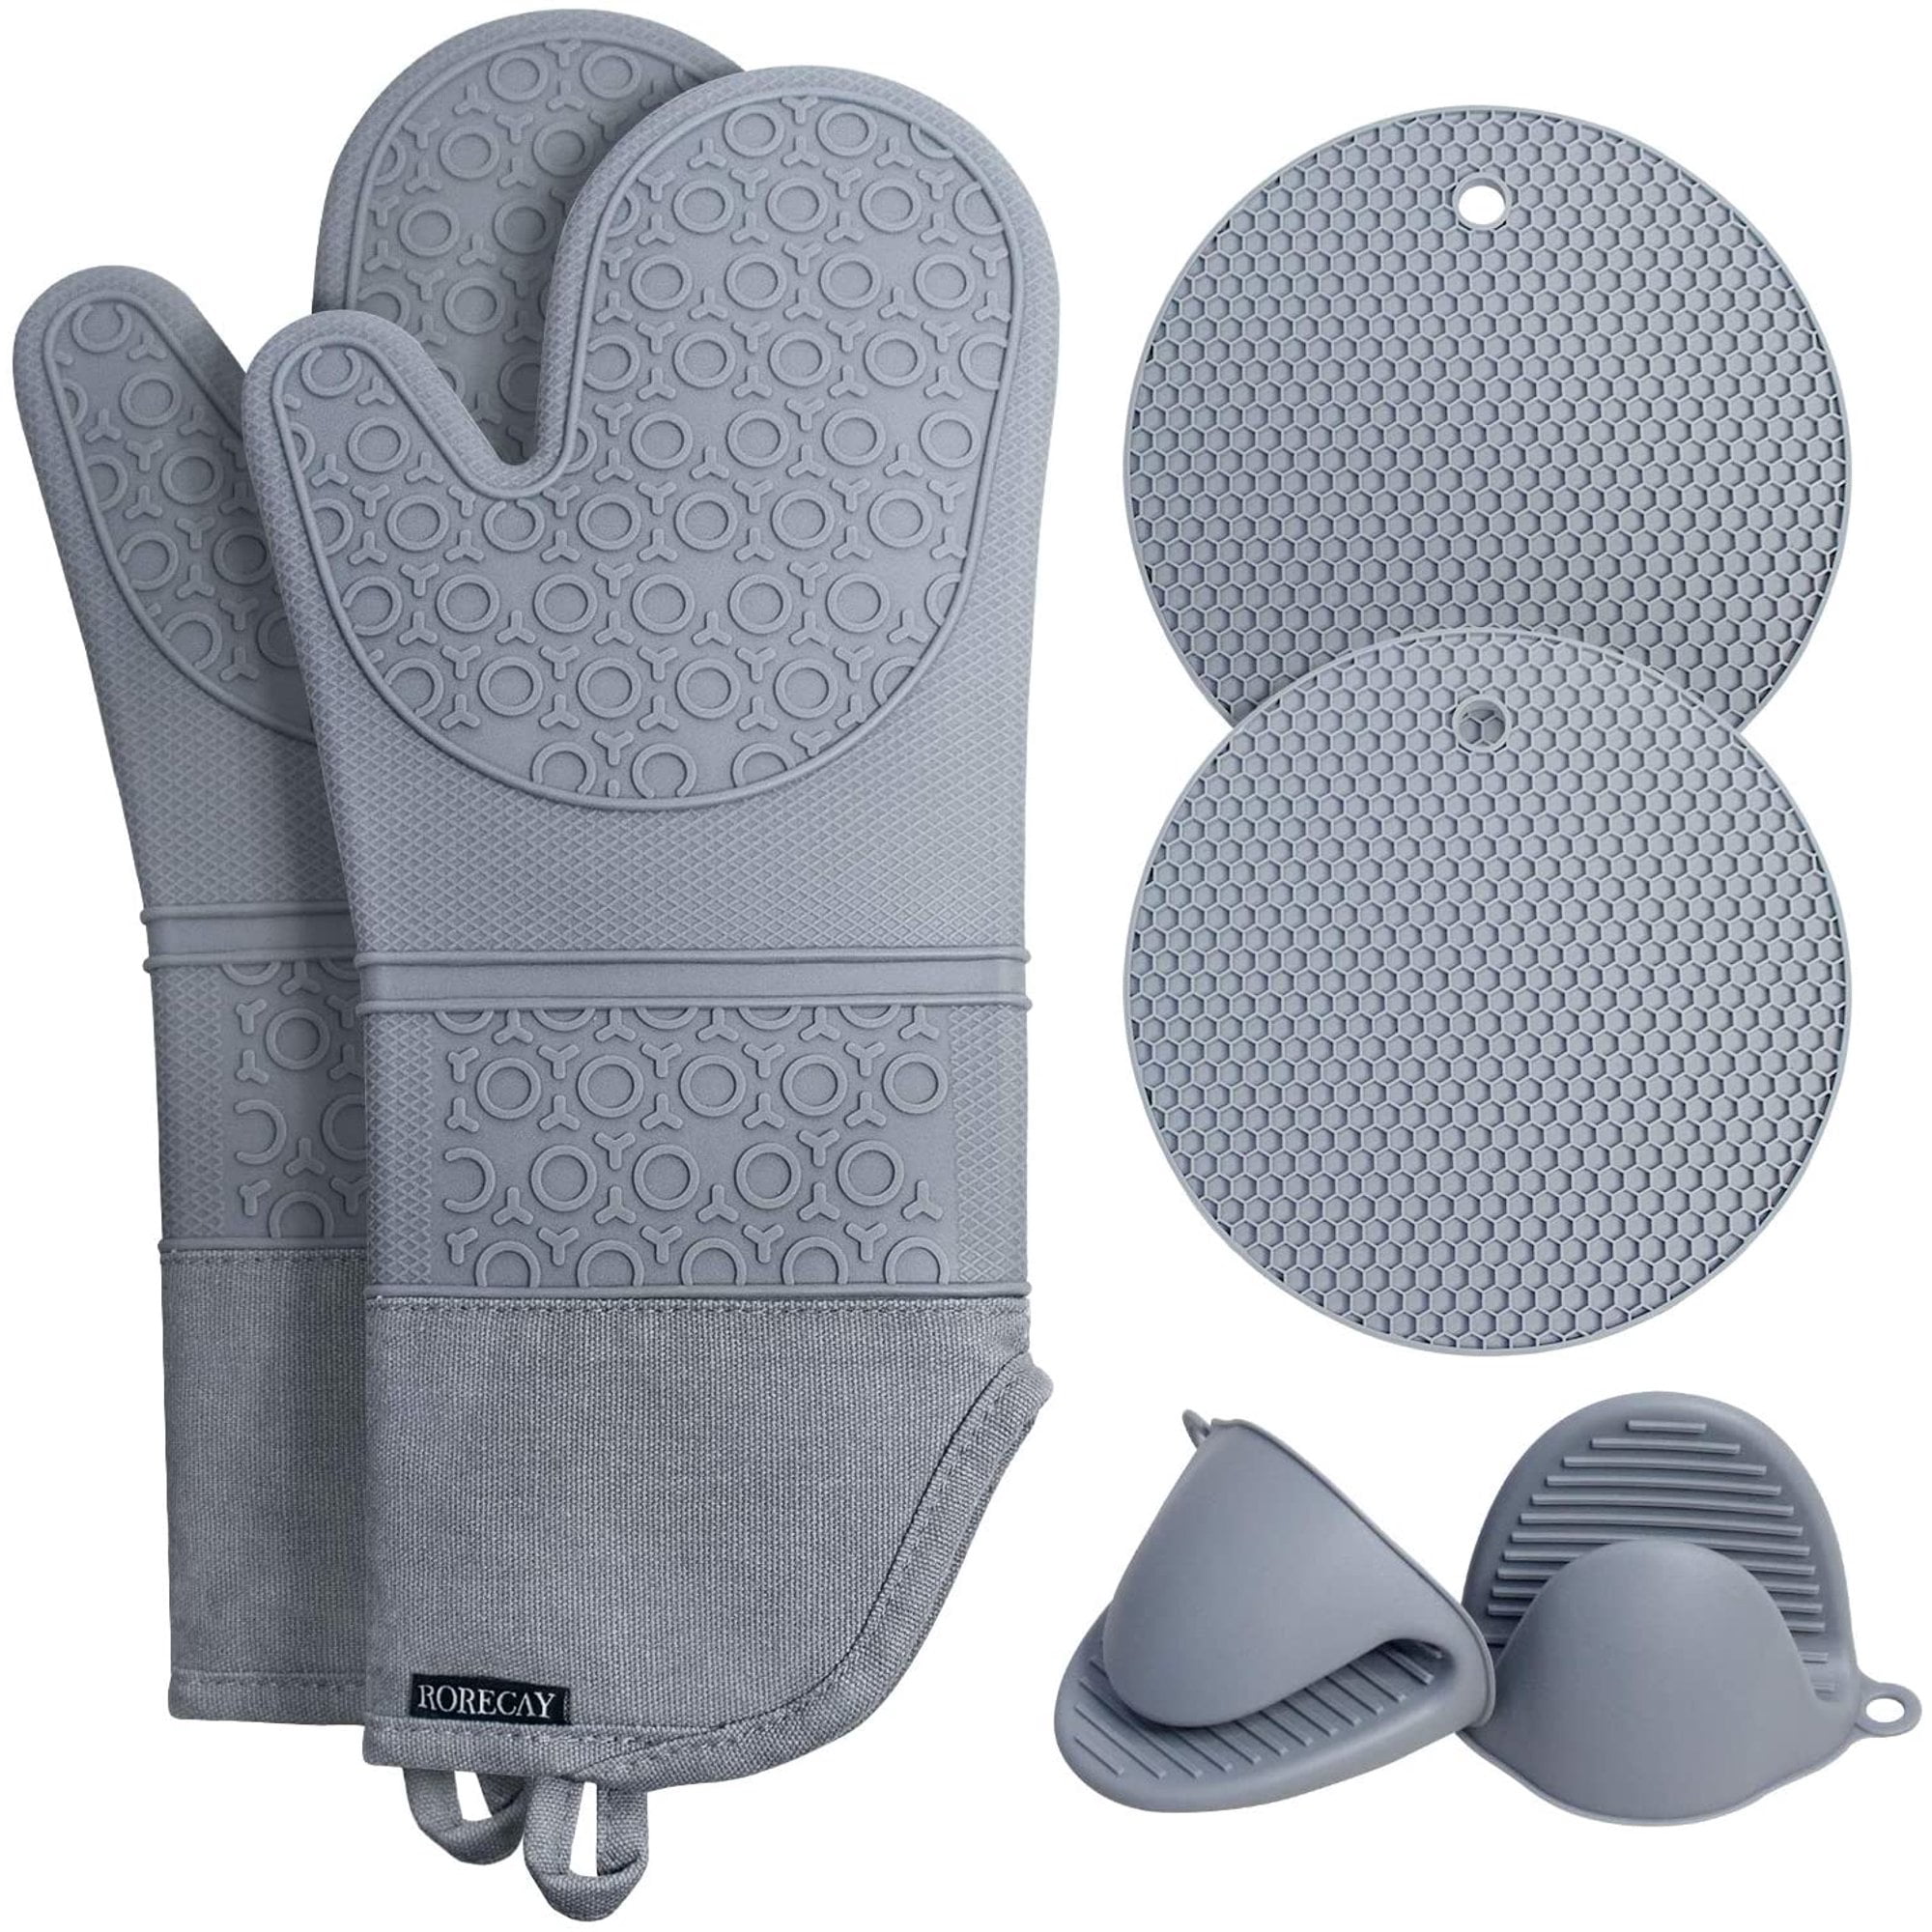 Details about   Trionfo Silicone mini Oven Mitts Pot Holder Heat Resistant Gloves 